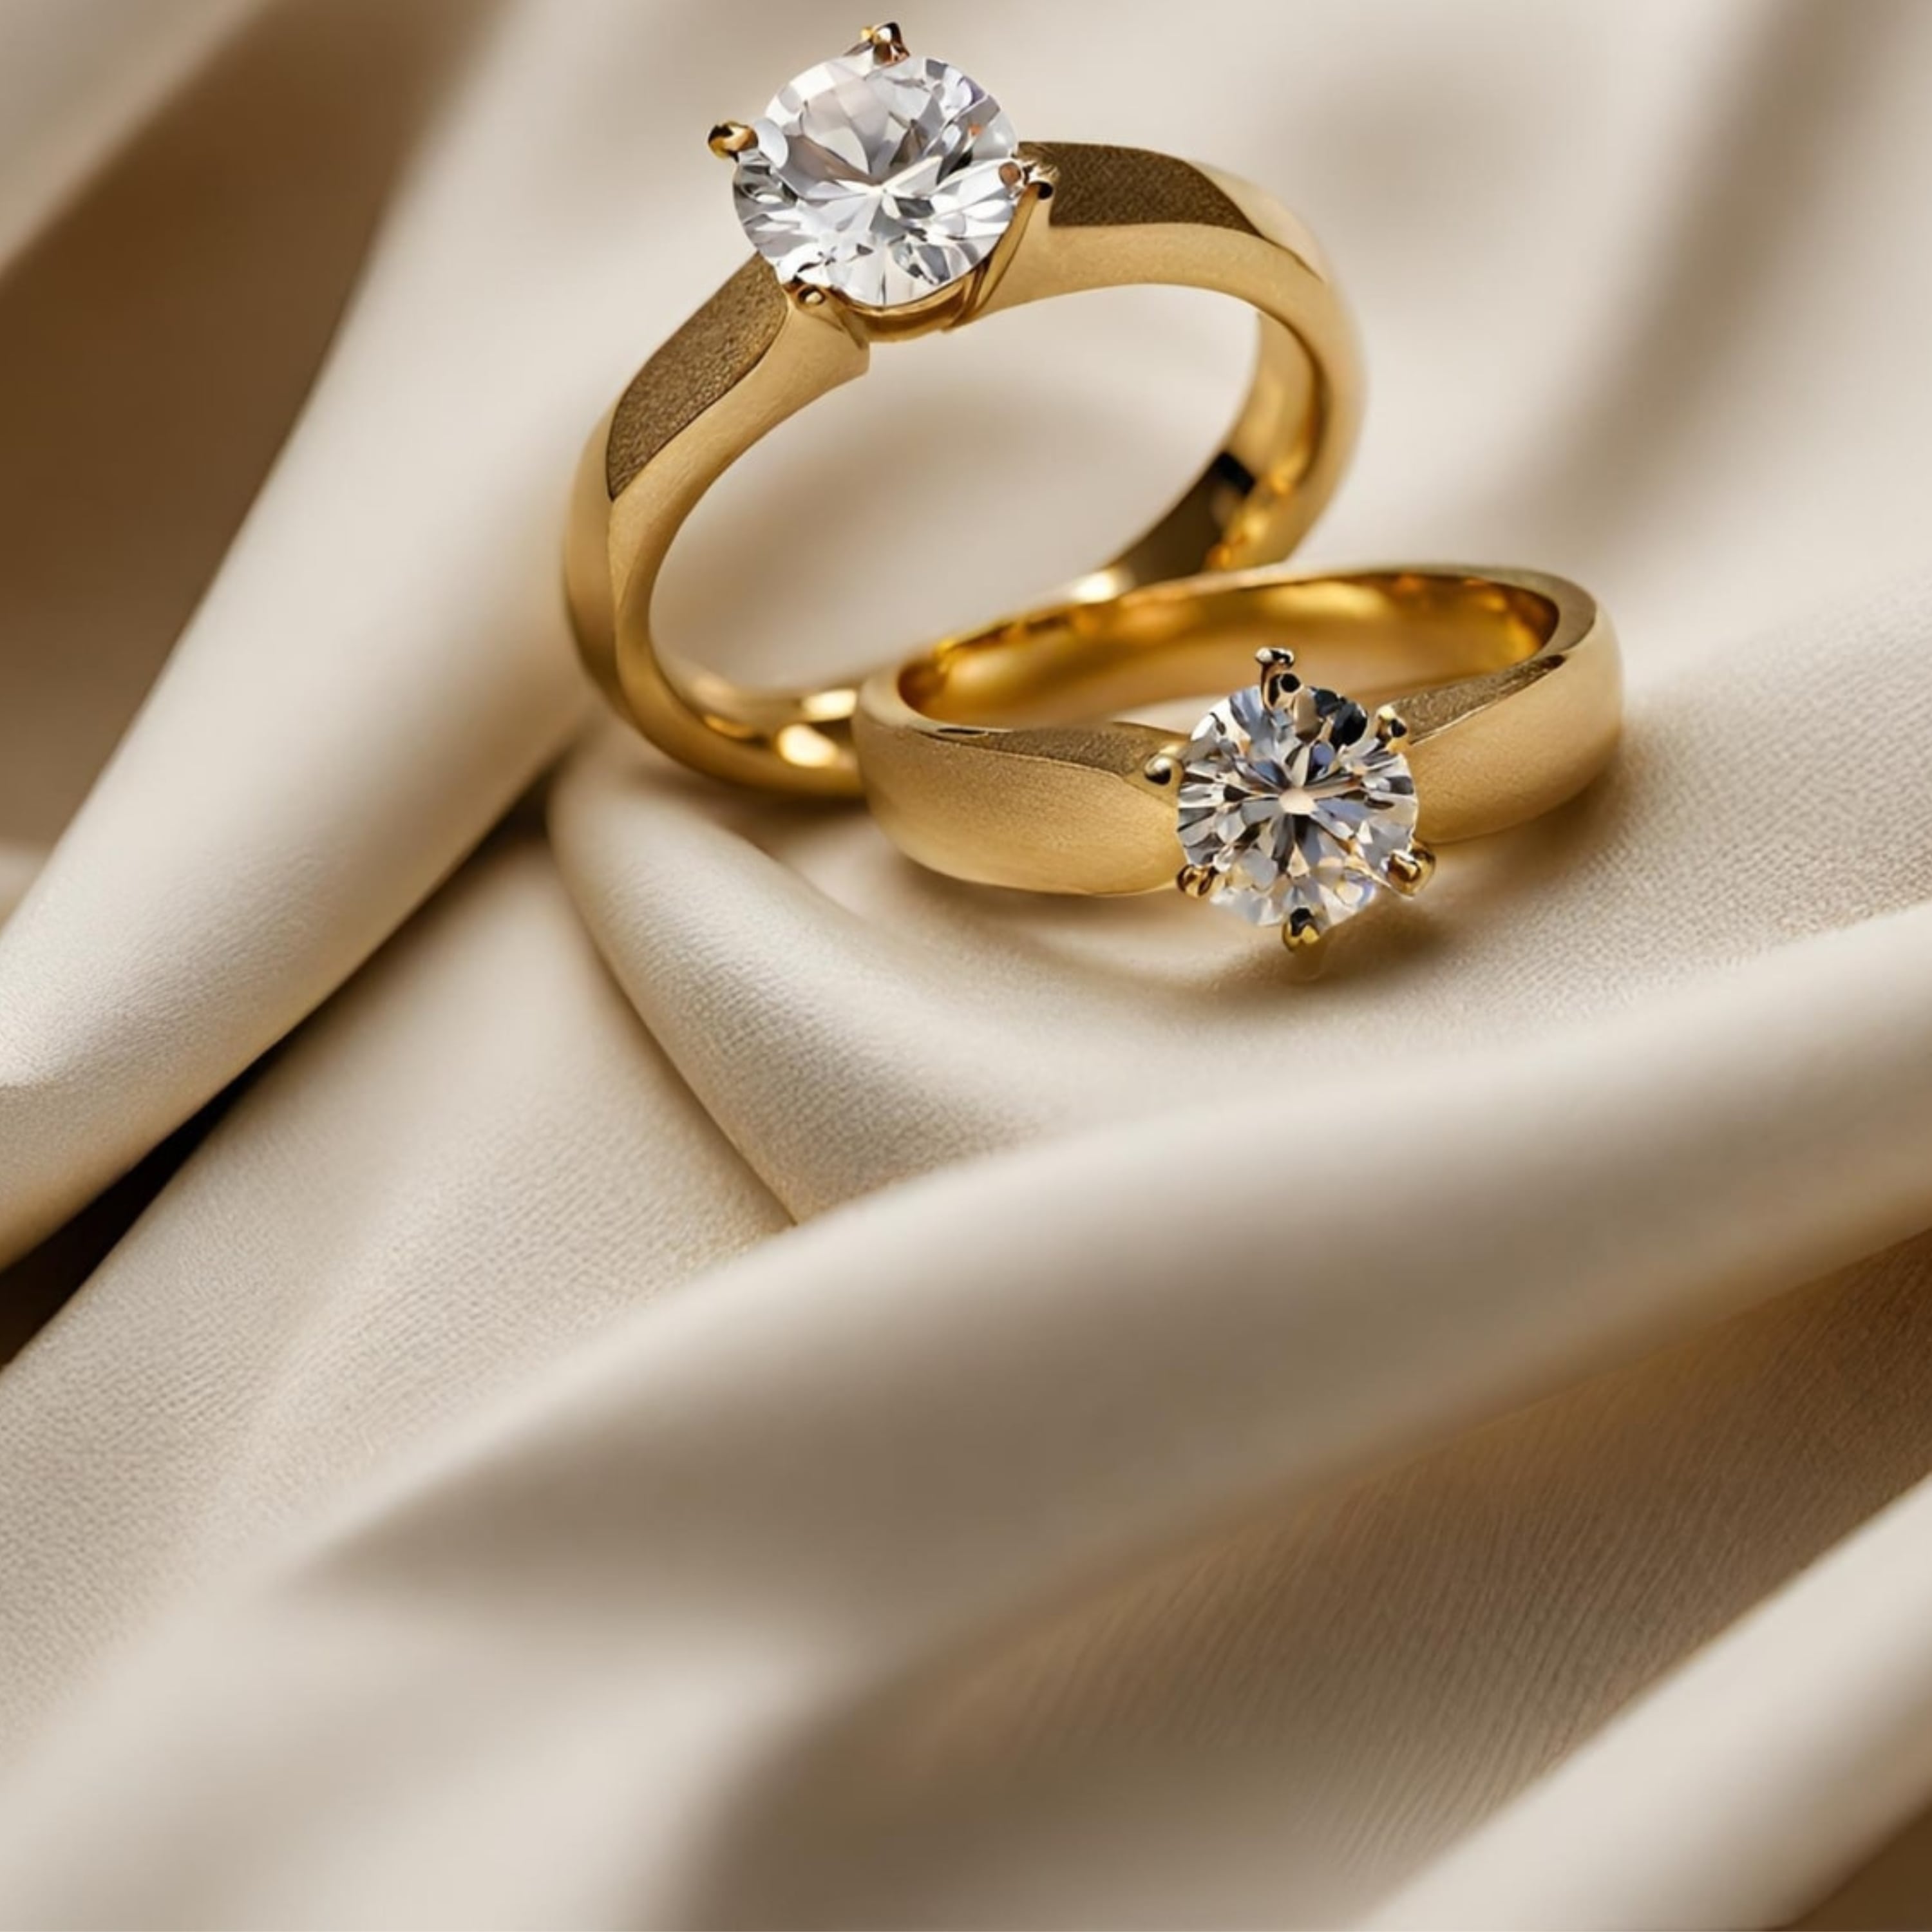 yellow gold solitaire engagement ring